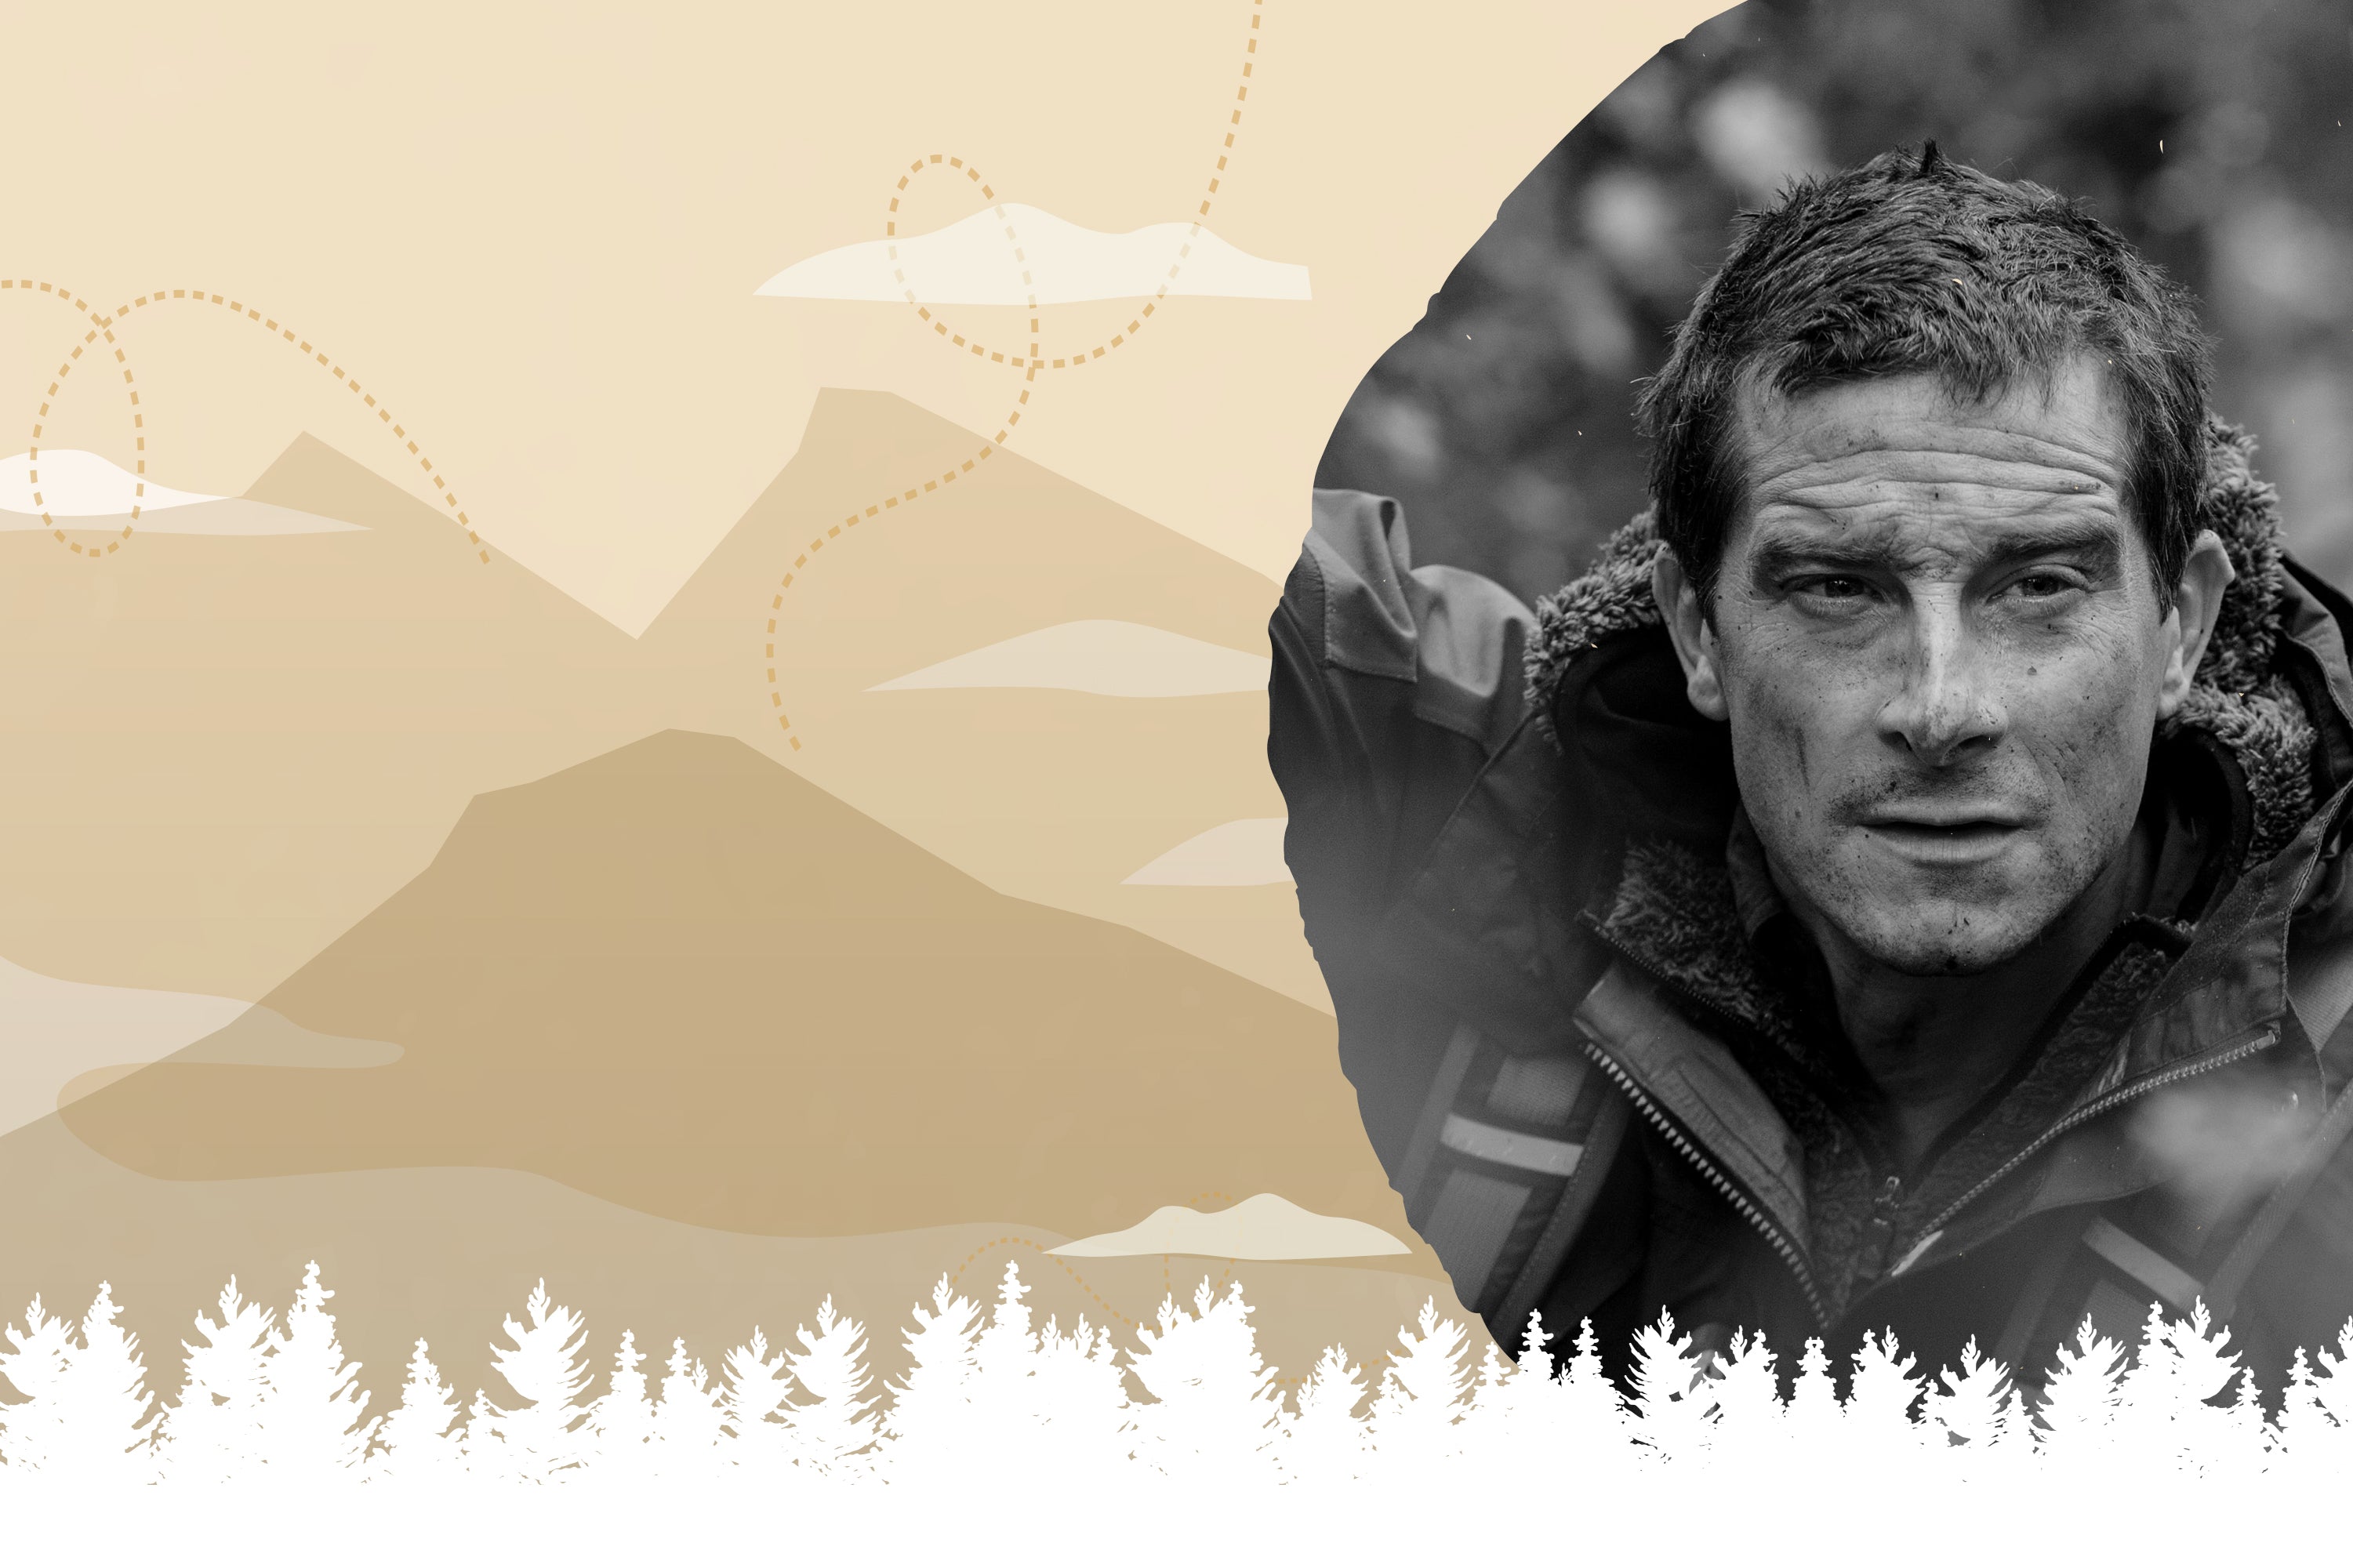 I Survived Bear Grylls: How To Watch - Outdoors with Bear Grylls